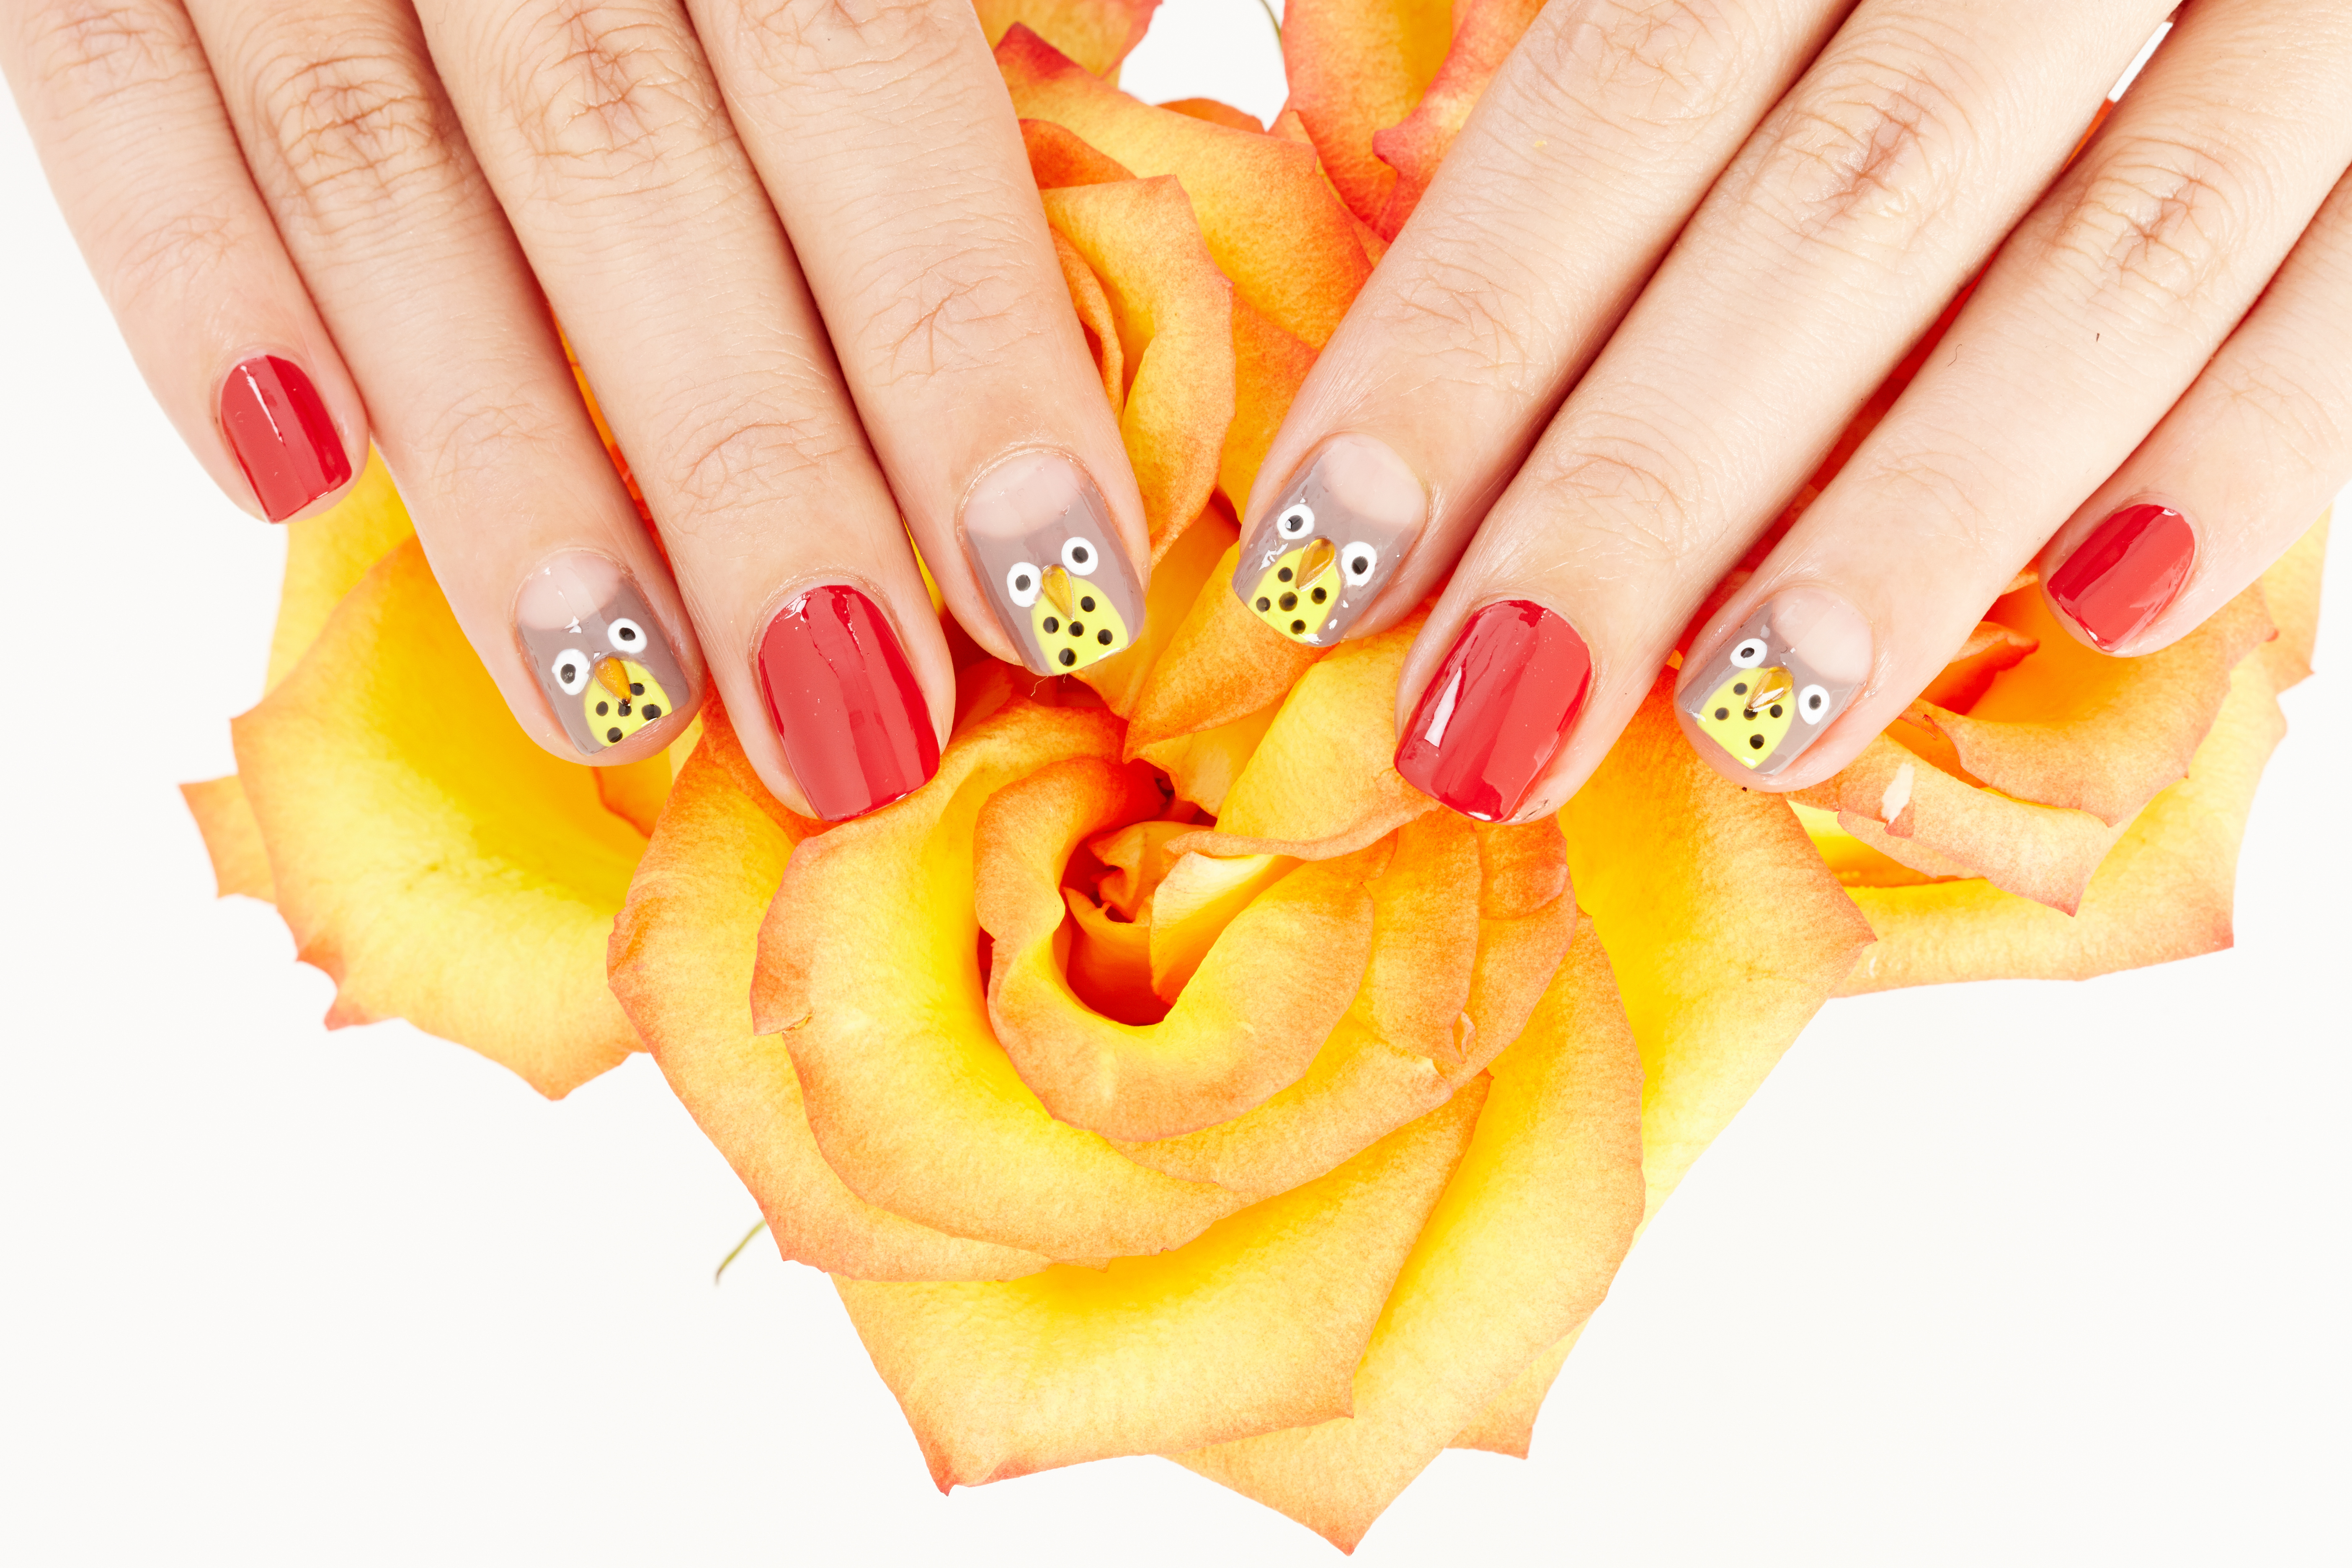 Hands holding an orange rose and nails are painted red and with owl accents